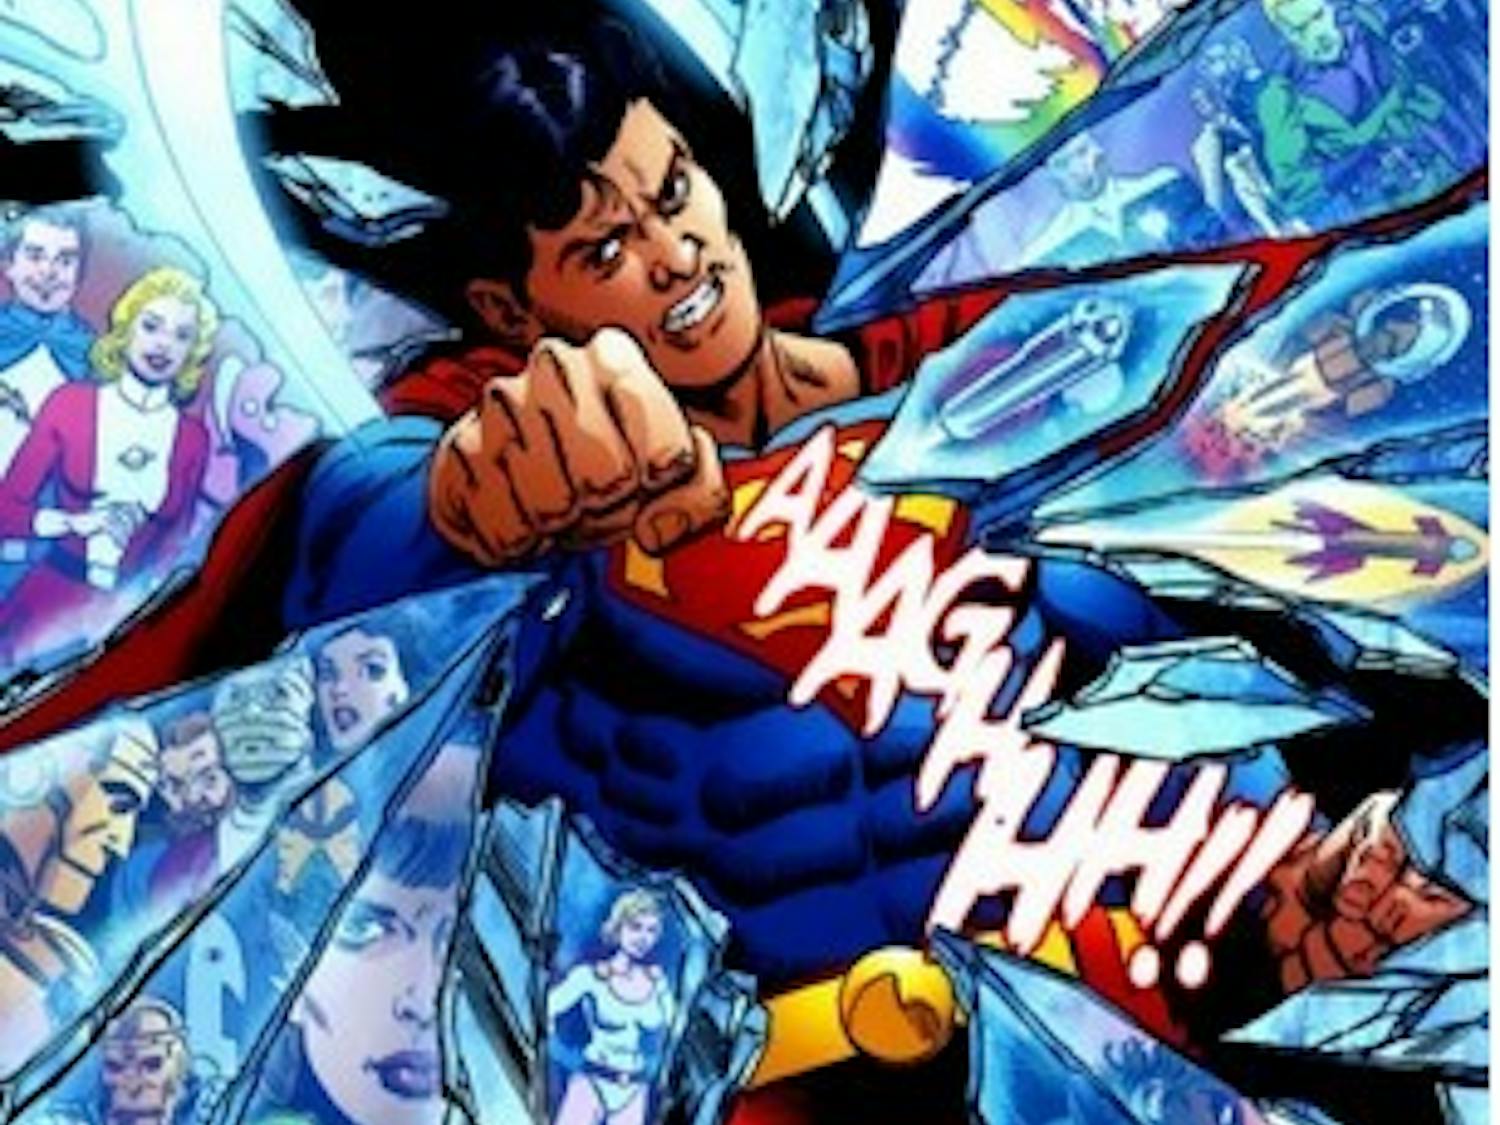 Superboy Punch! Image from Final Crisis by DC Comics. 